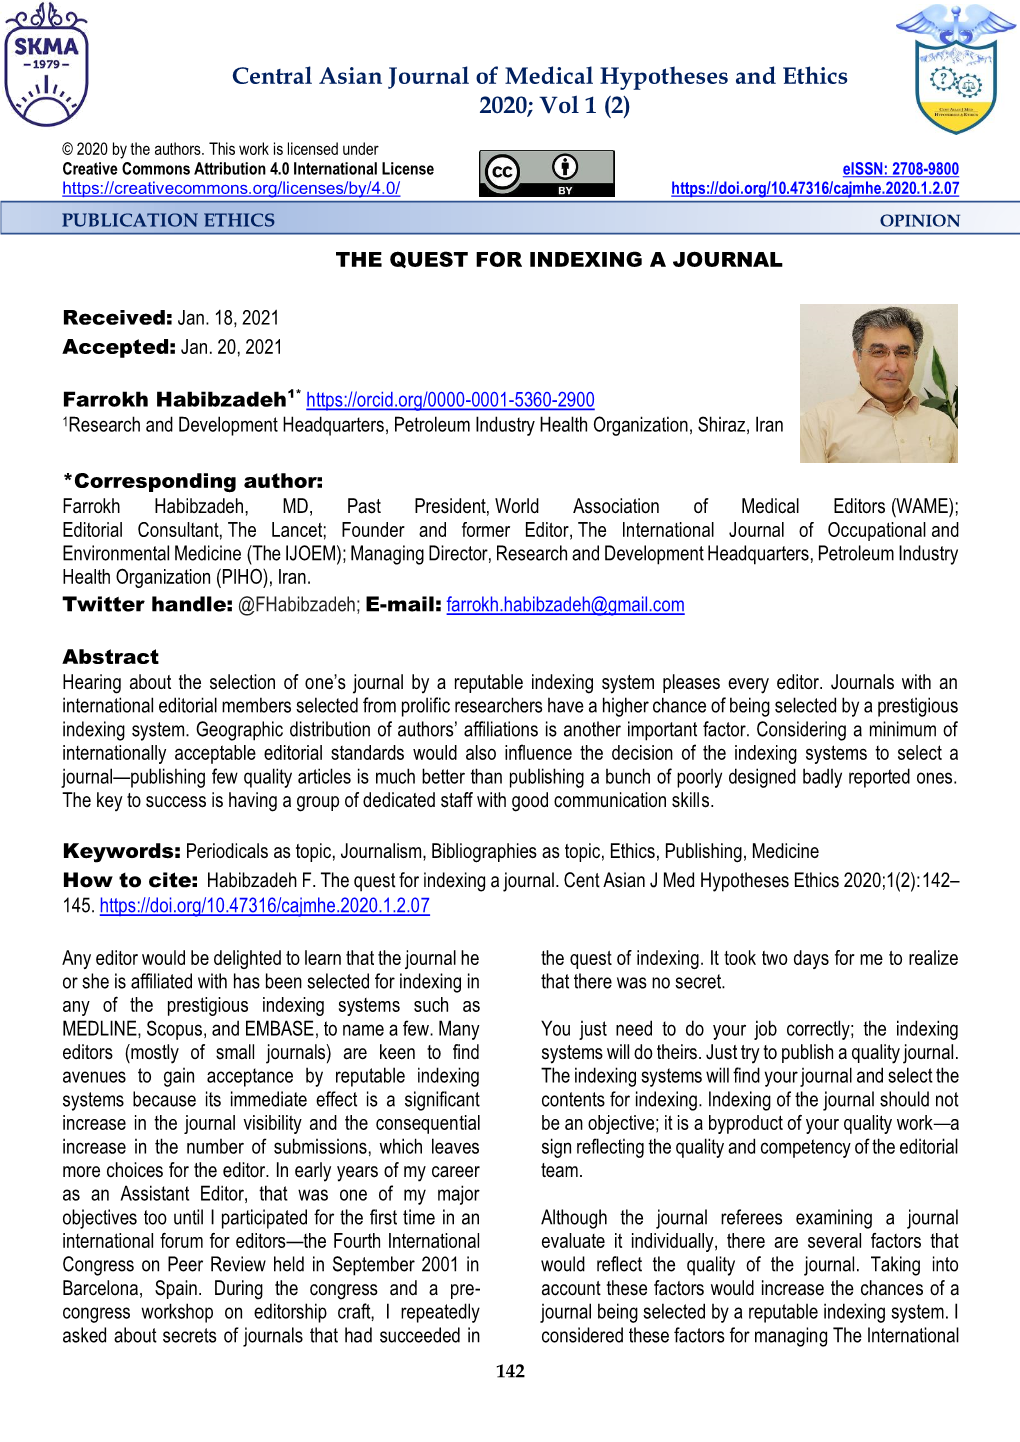 Central Asian Journal of Medical Hypotheses and Ethics 2020; Vol 1 (2)